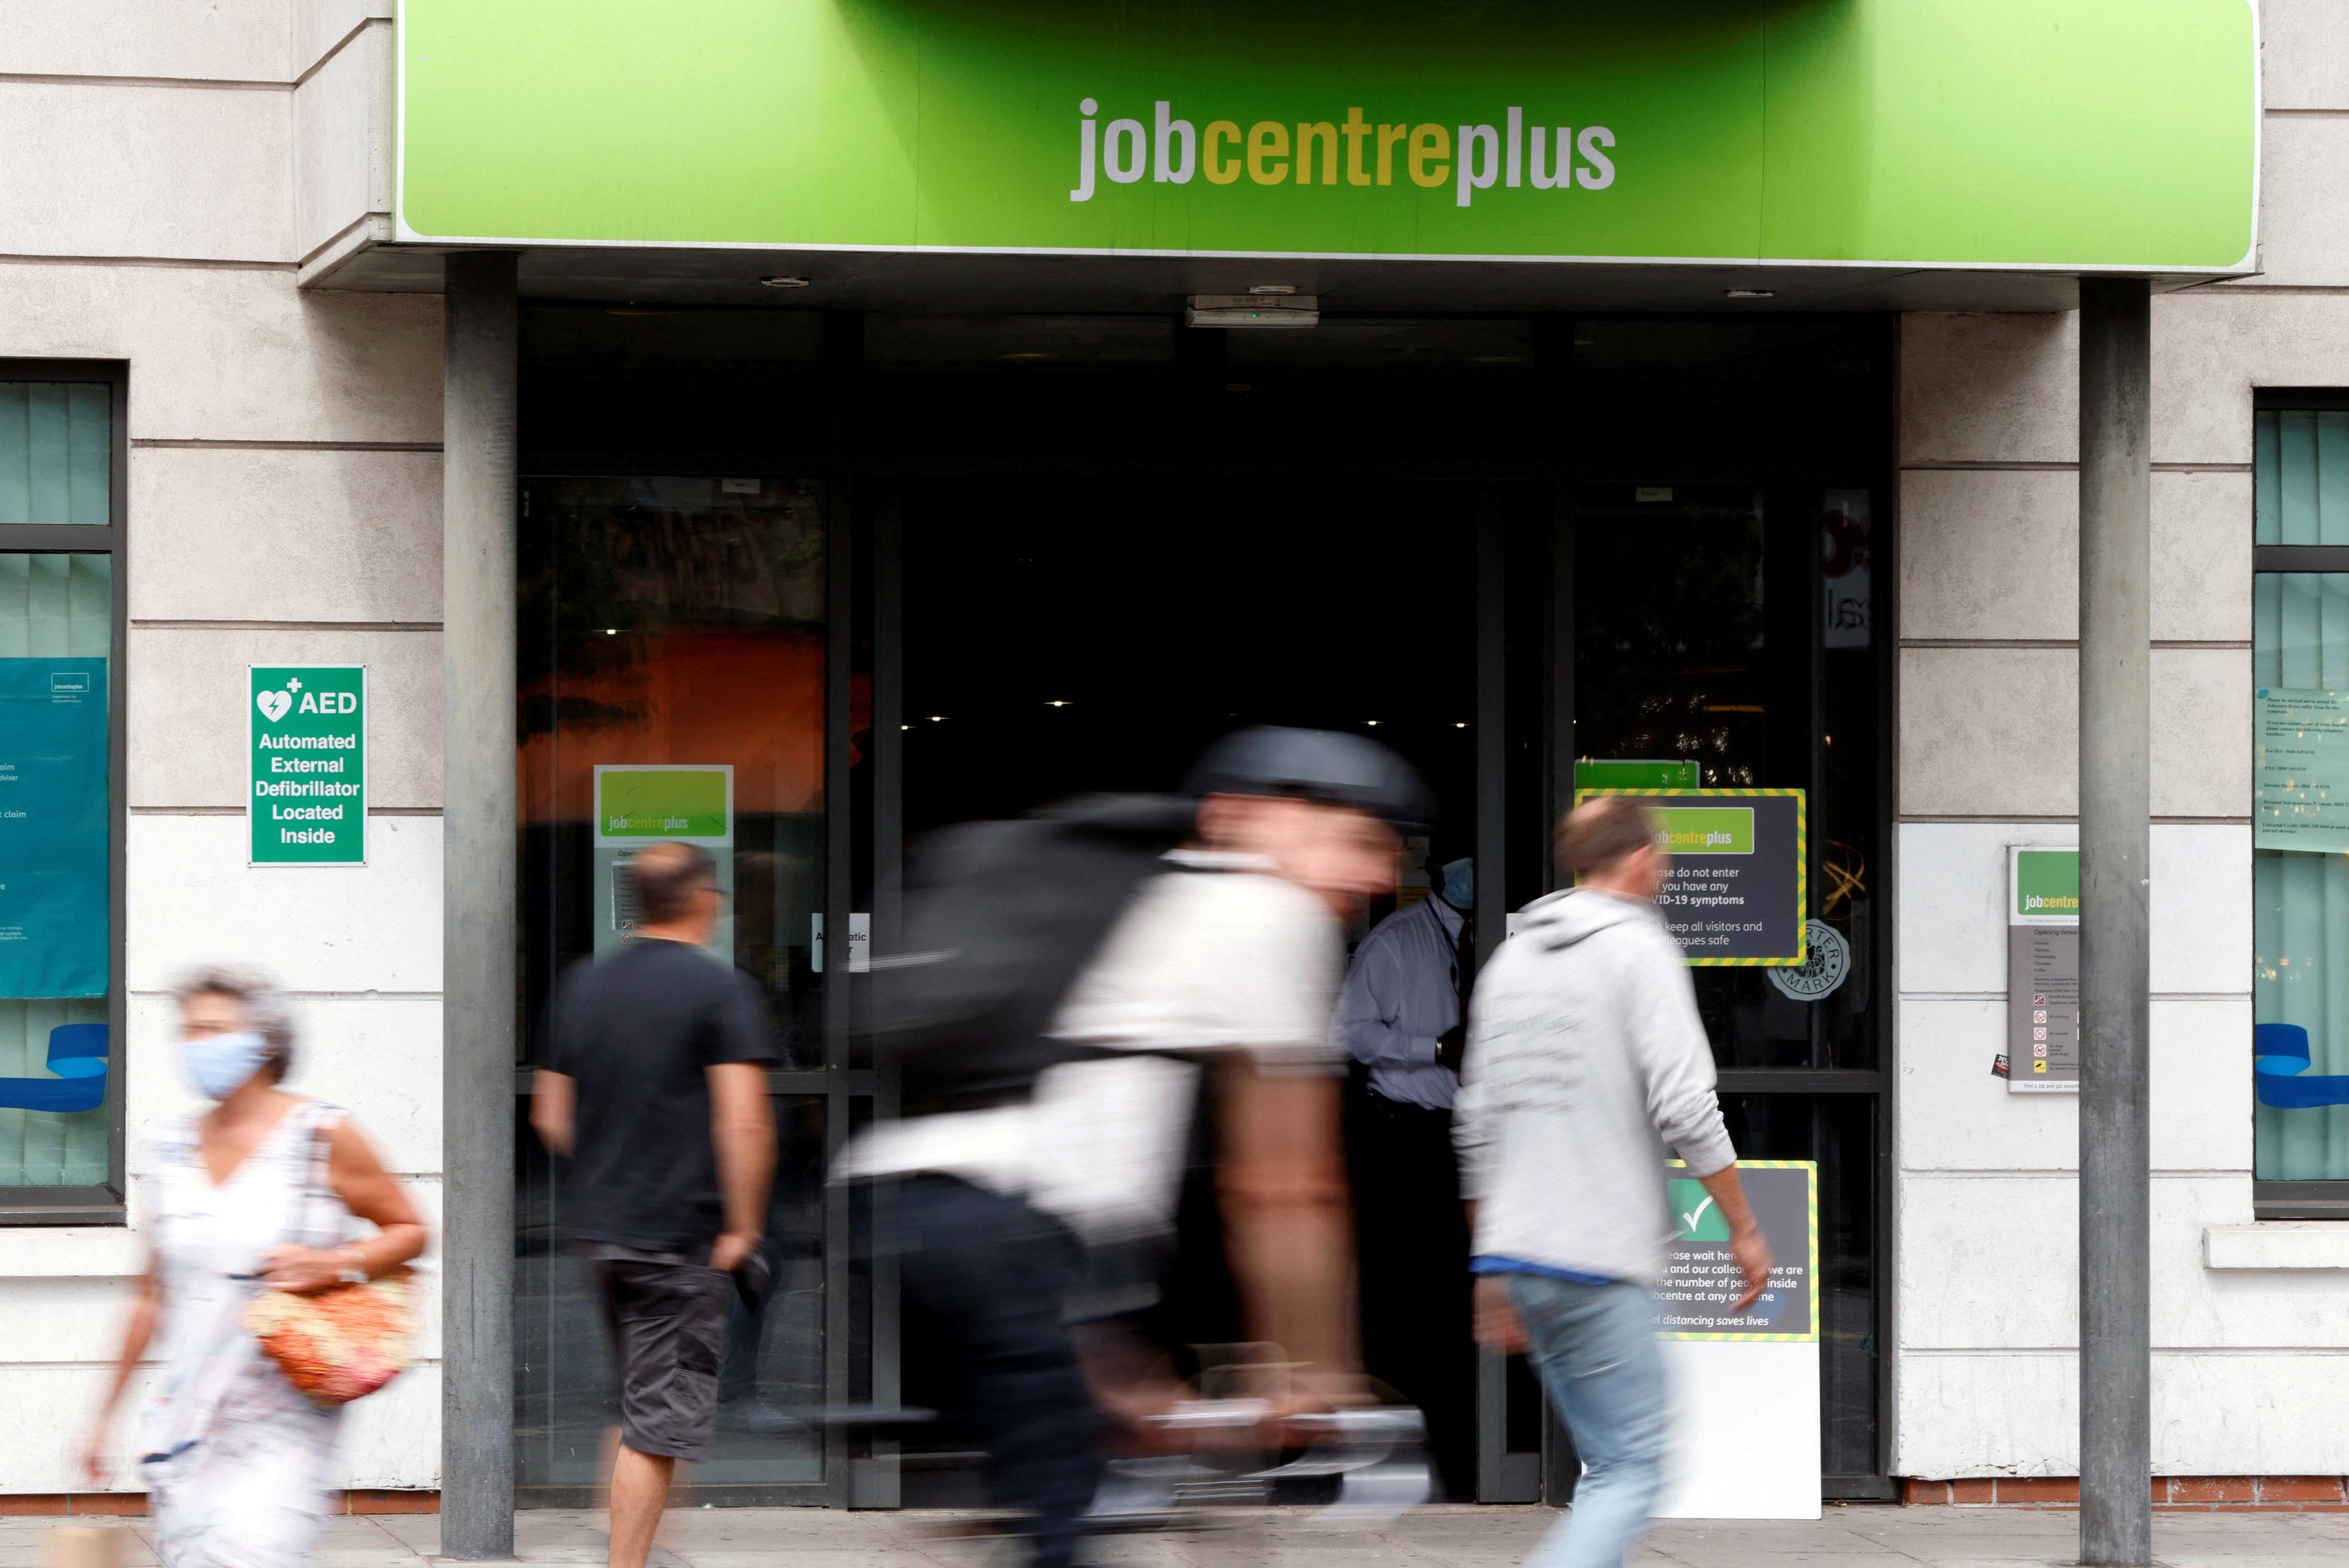 People walk past a branch of Jobcentre Plus, a government run employment support and benefits agency, as the outbreak of Covid-19 continues, in Hackney, London, Britain, Aug 6. Photo: Reuters